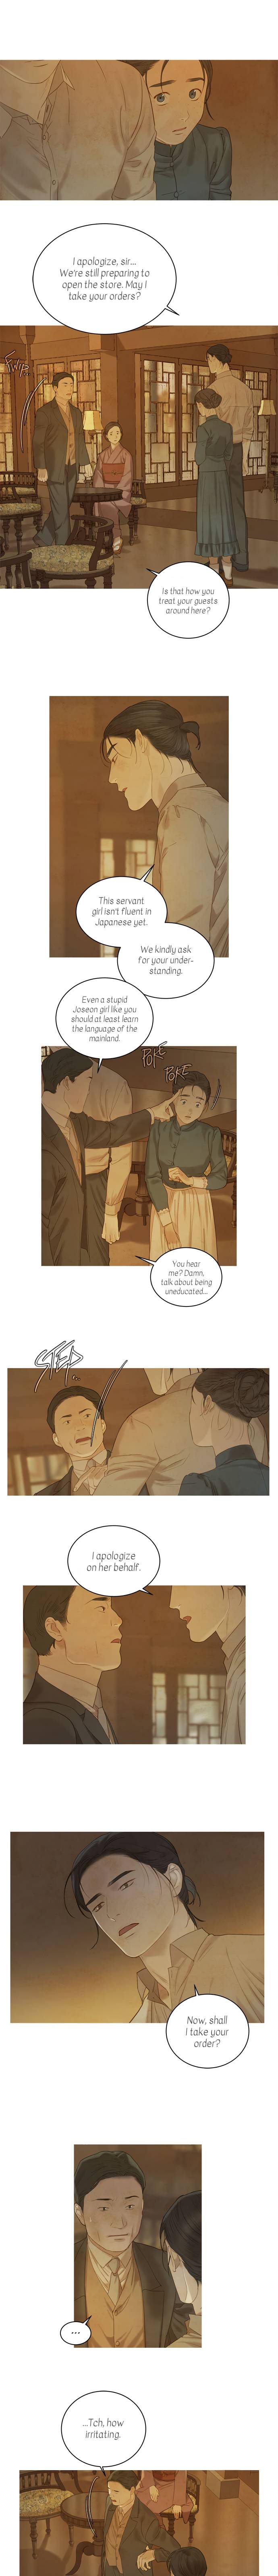 Gorae Byul - The Gyeongseong Mermaid - Chapter 43 Page 1